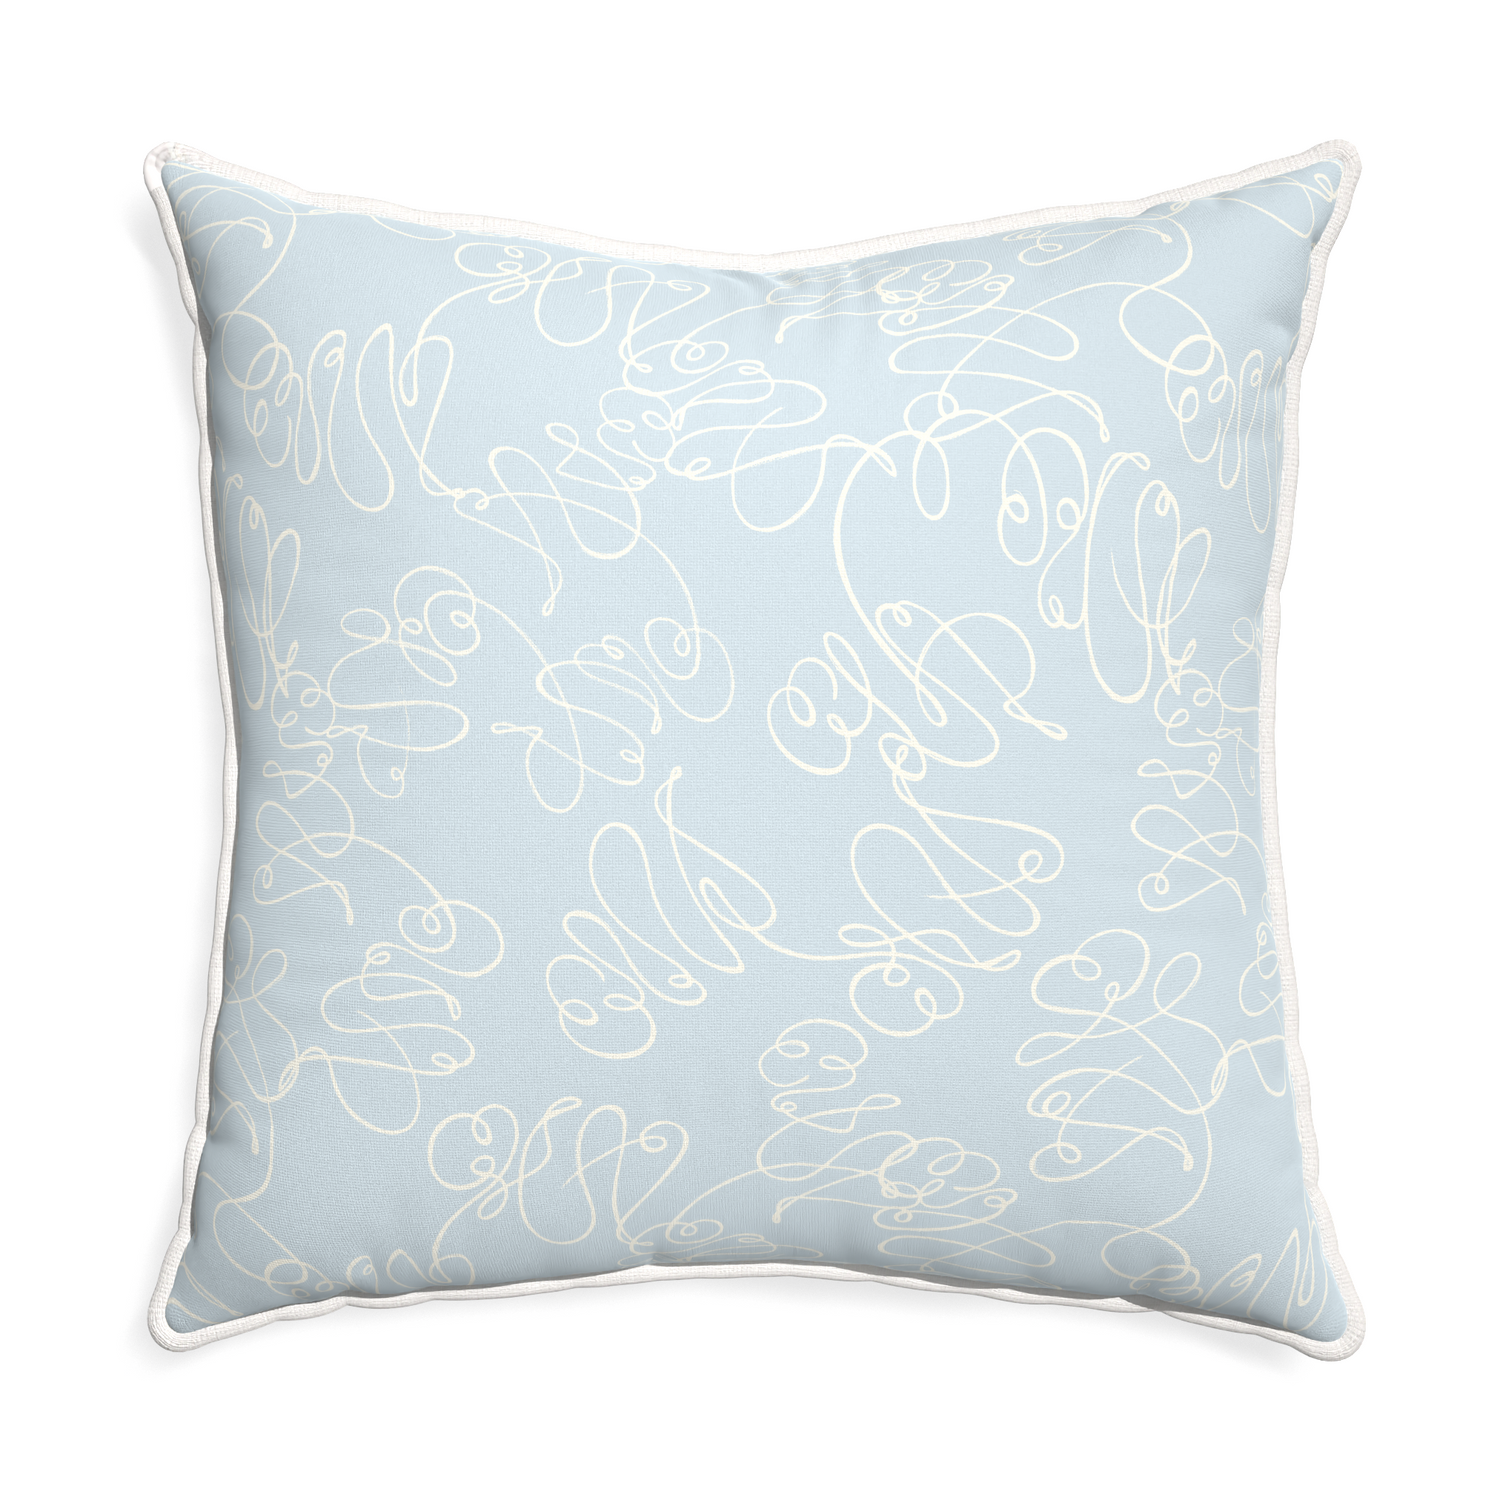 Euro-sham mirabella custom powder blue abstractpillow with snow piping on white background